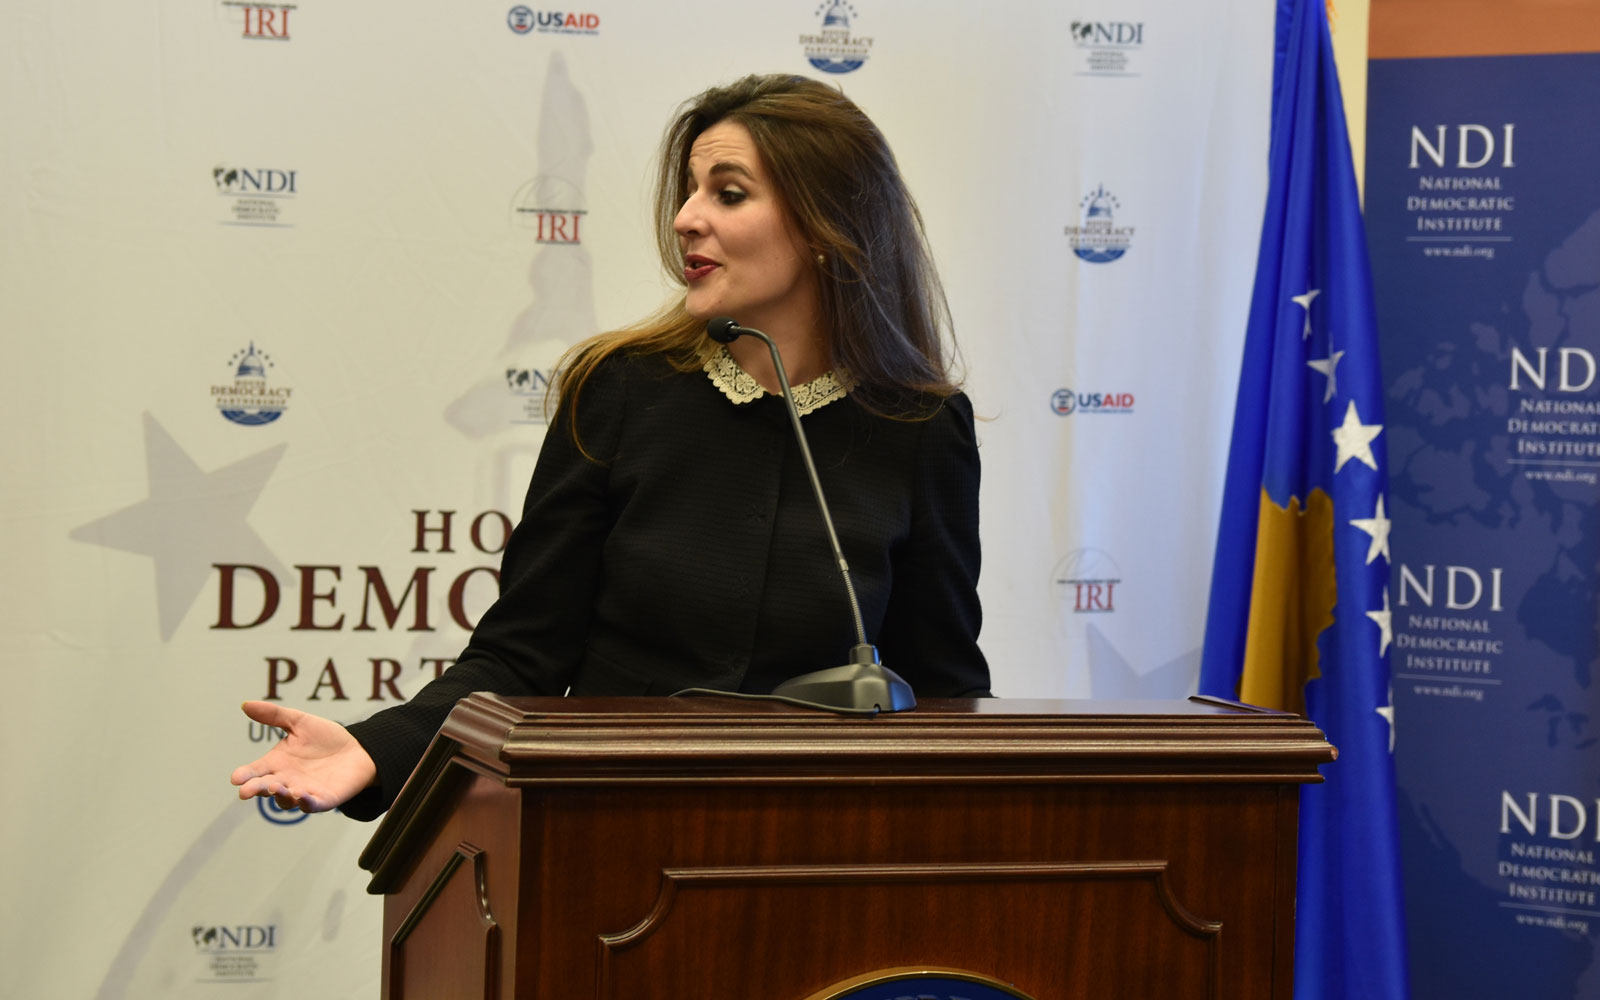 Her Excellency Vlora Çitaku, Ambassador of the Republic of Kosovo, addresses the audience at a celebration of the Kosovo Assembly, commemorating the Republic of Kosovo’s 10th anniversary.